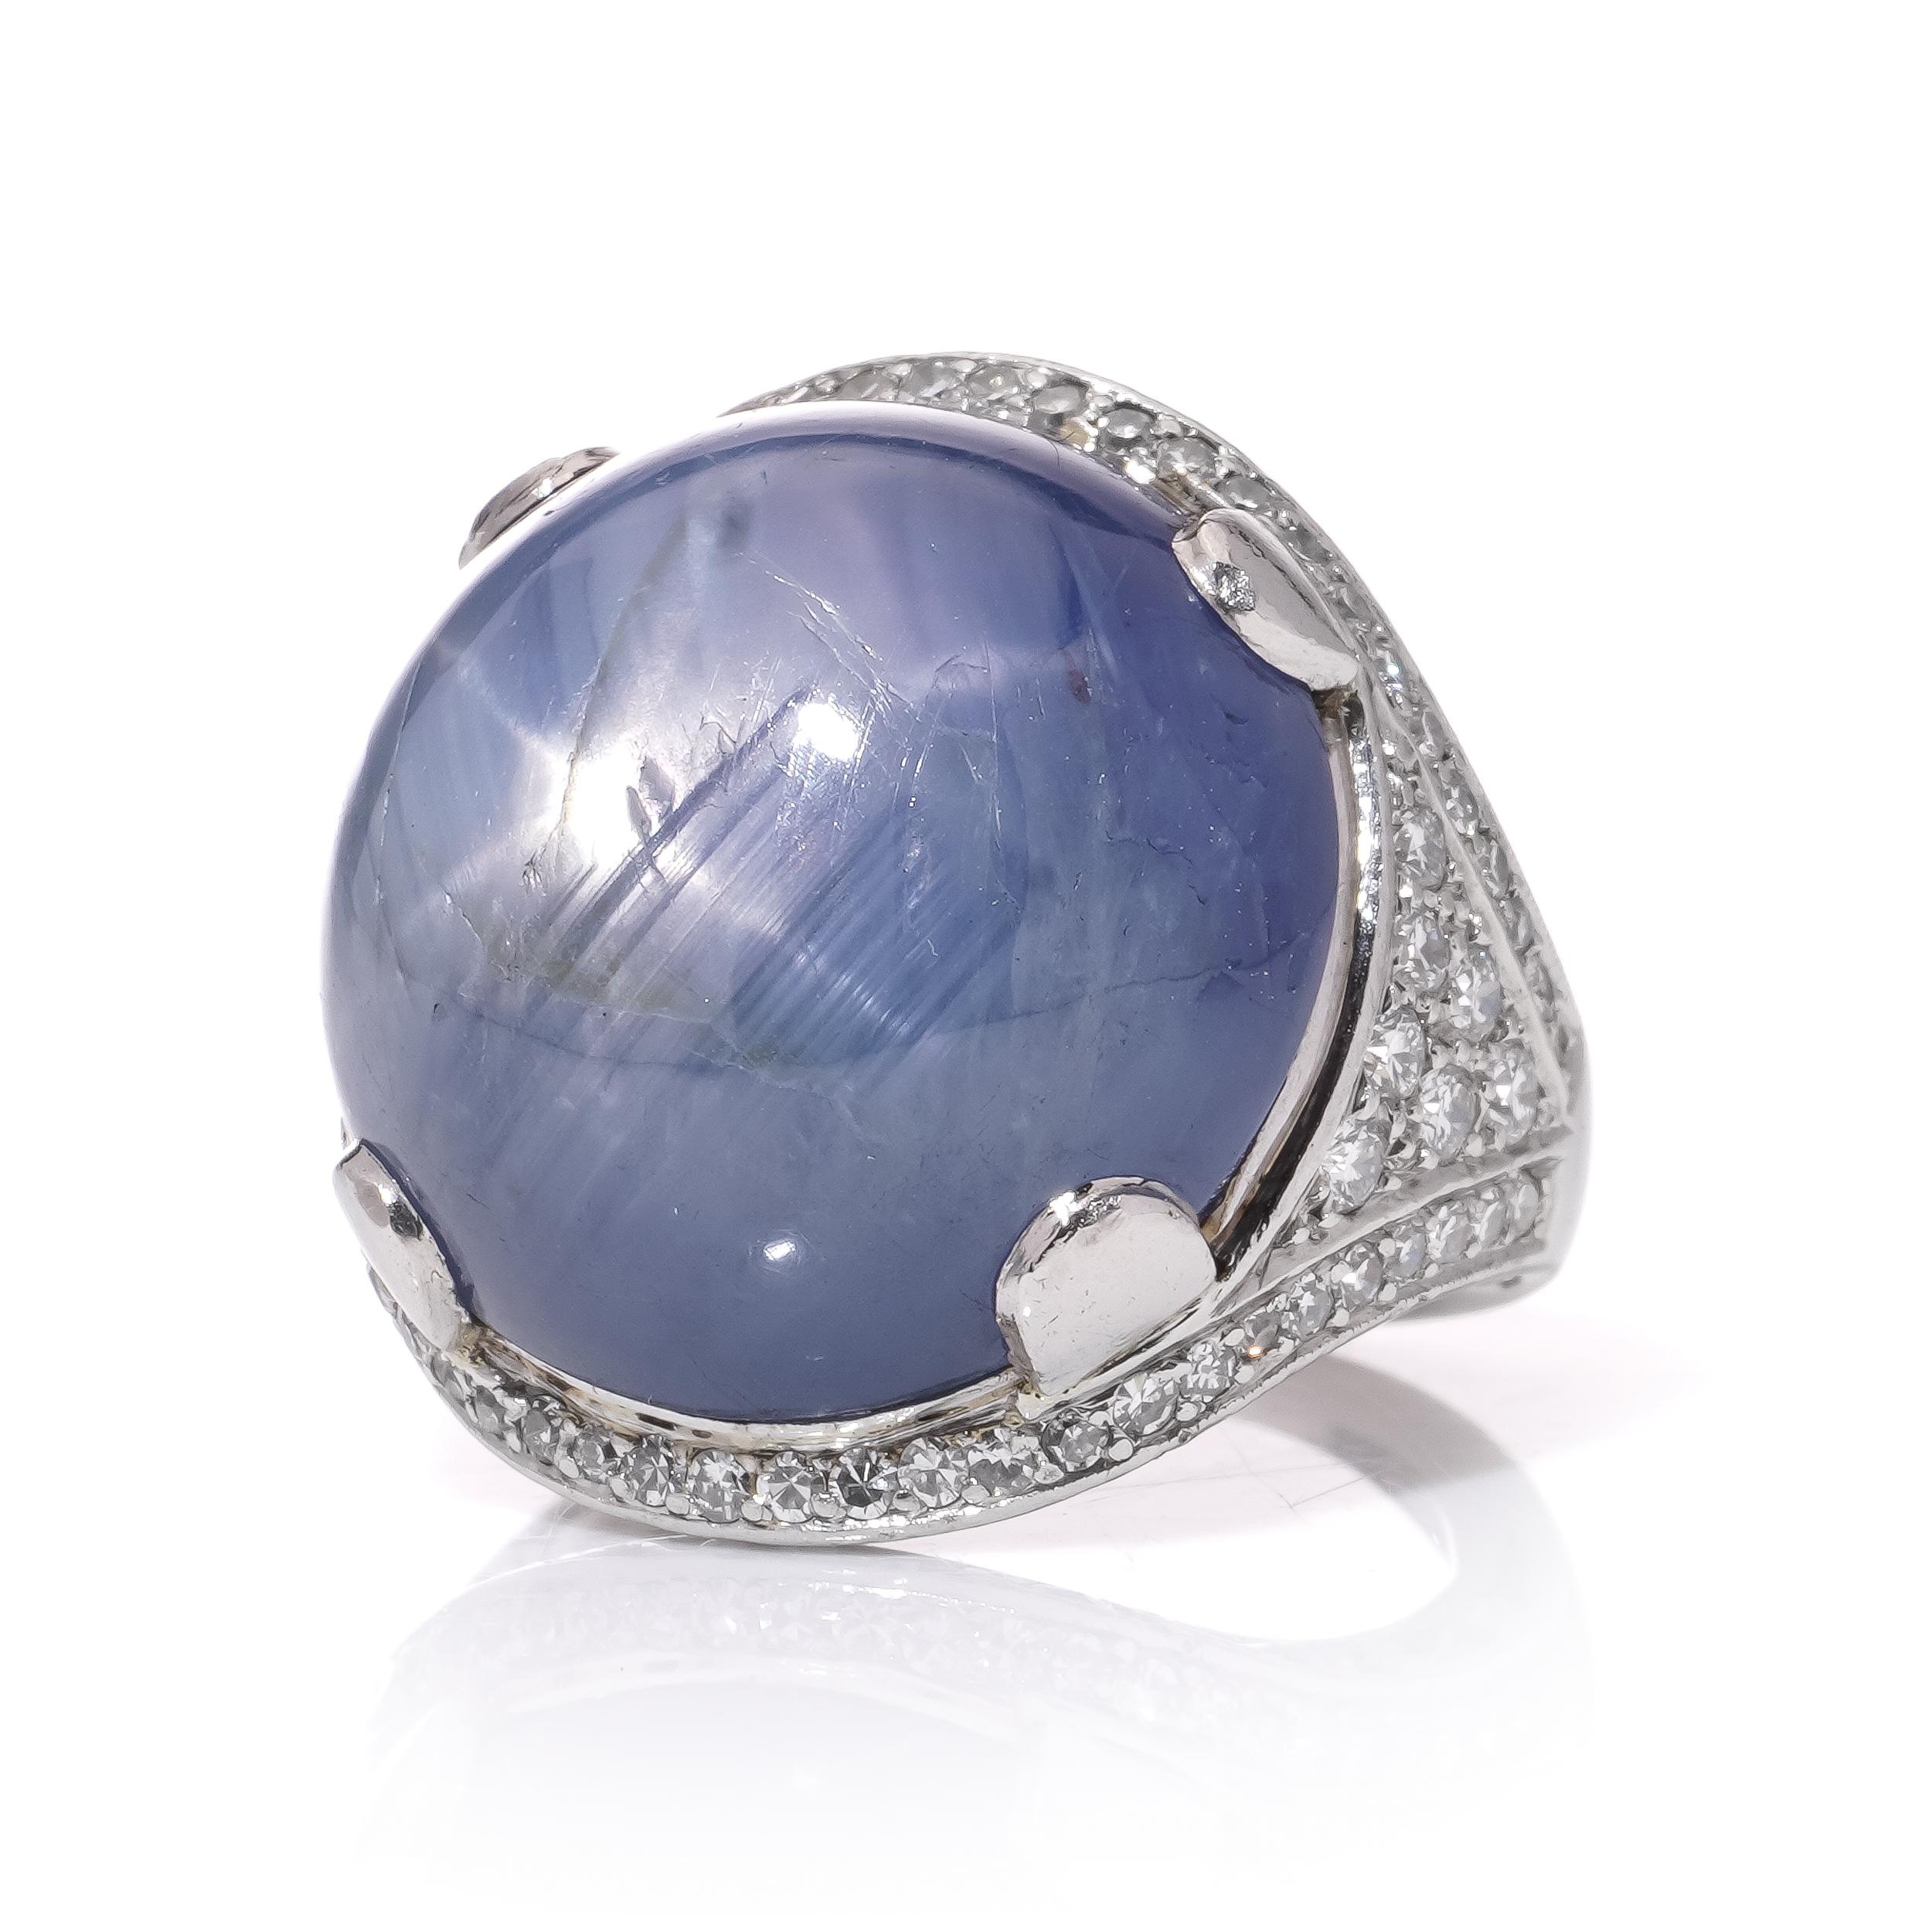 Platinum ladies' dome ring with 46 cts. of round natural cabochon sapphire For Sale 3